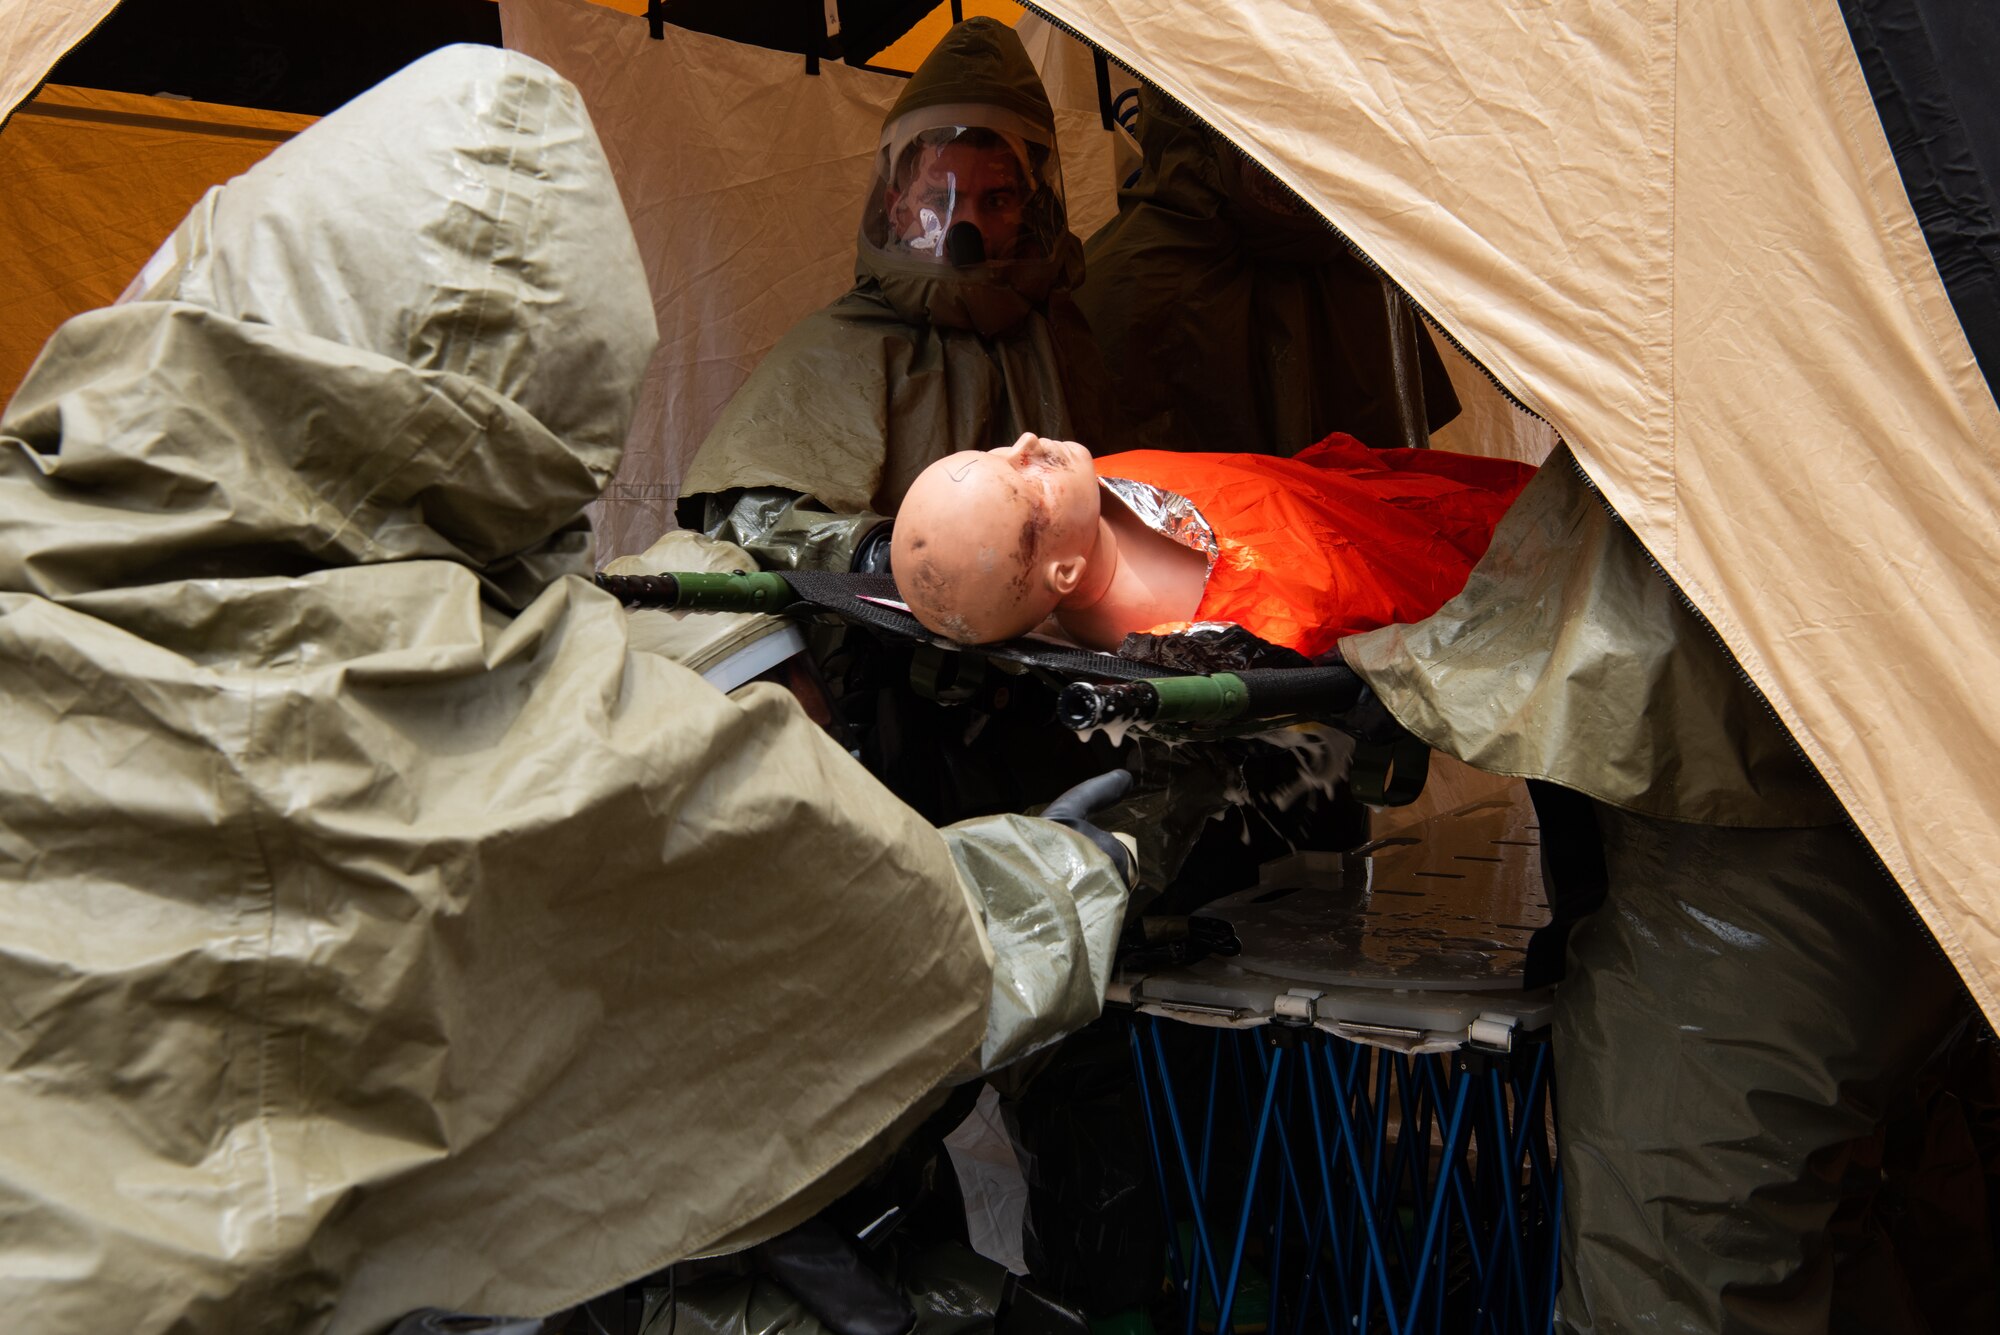 Airmen assigned to the 7th Medical Group dry off a simulated patient during a decontamination exercise at Dyess Air Force Base, Texas, June 1, 2023.The exercise required the completion of a three-day training course that tested Airmen’s medical disaster response. (U.S. Air Force photo by Airman 1st Class Alondra Cristobal Hernandez)